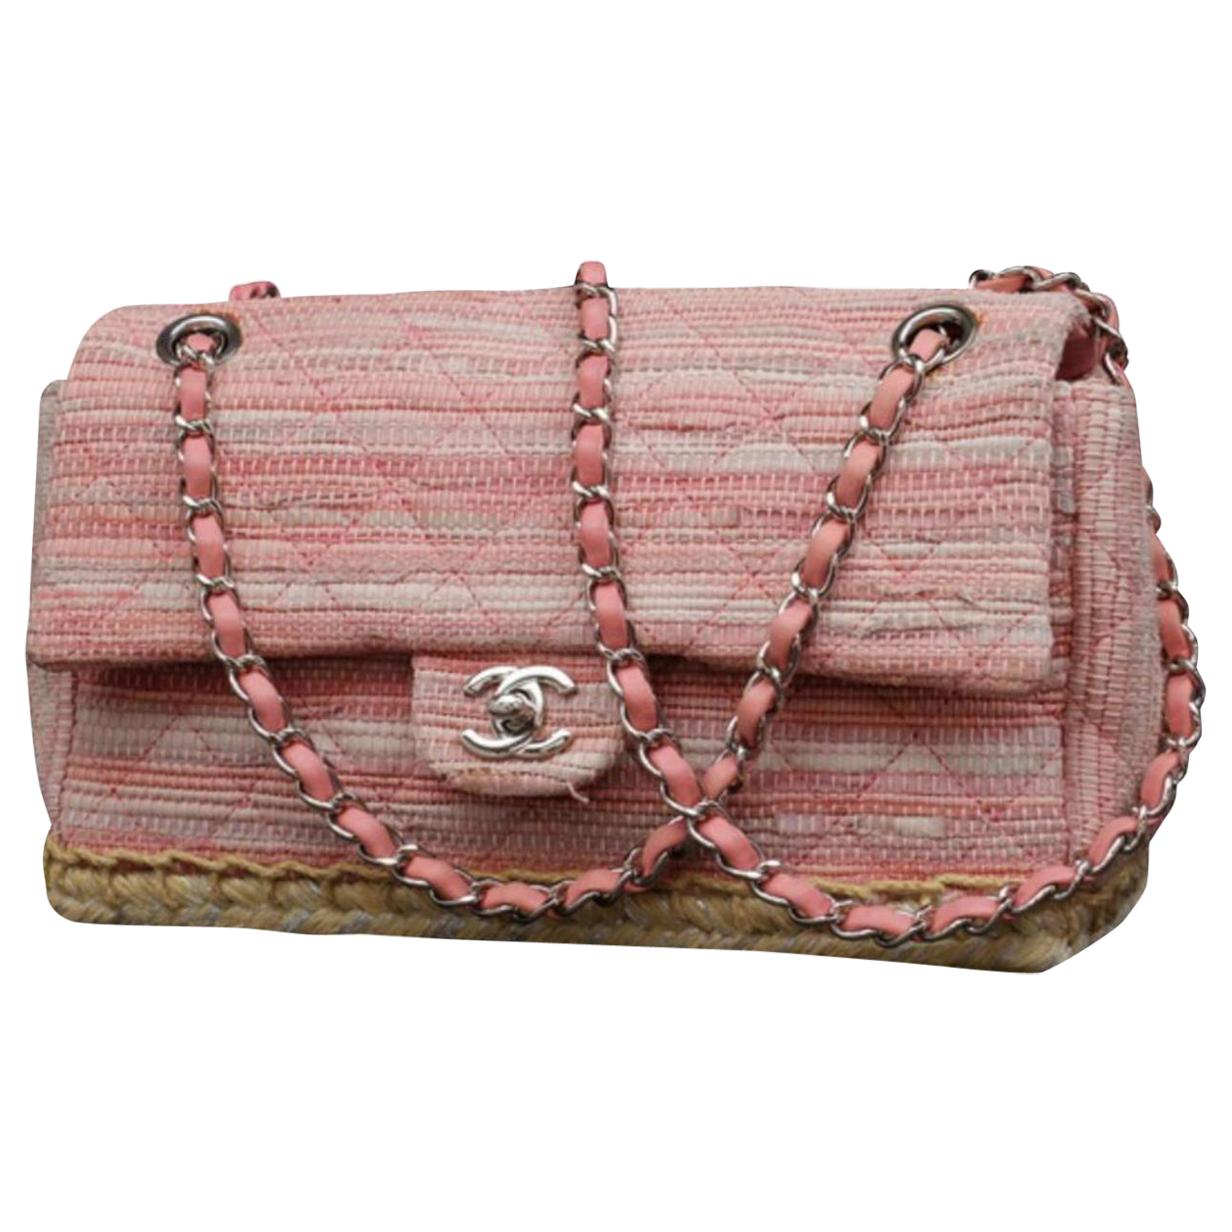 Chanel Classic Flap Quilted Espadrille Medium 233088 Pink Tweed Cross Body Bag For Sale